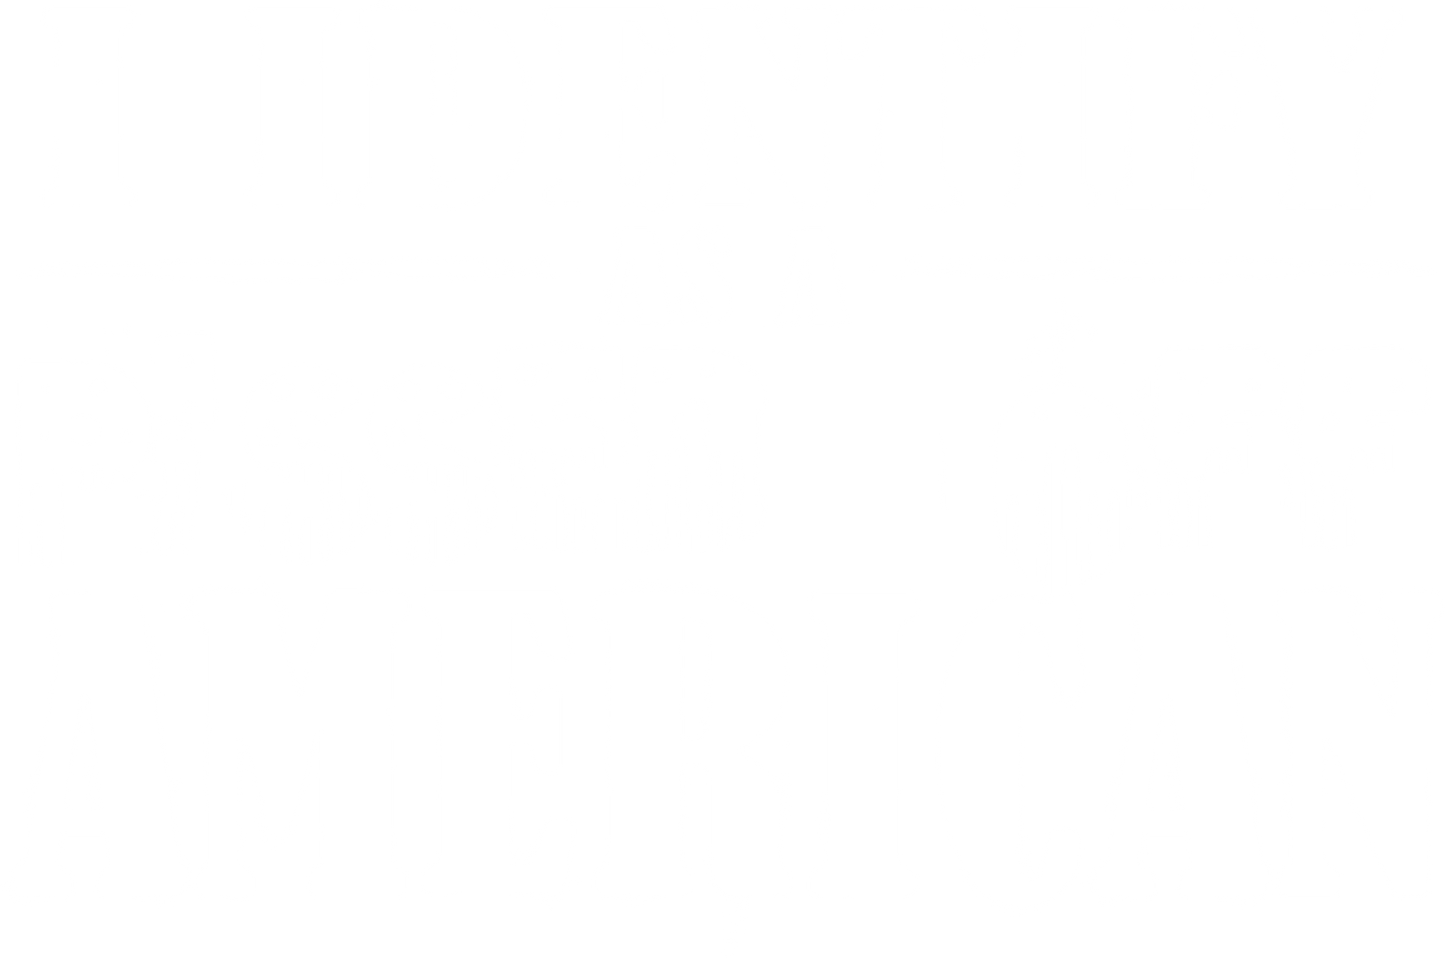 I Identity as a Pissed Off American